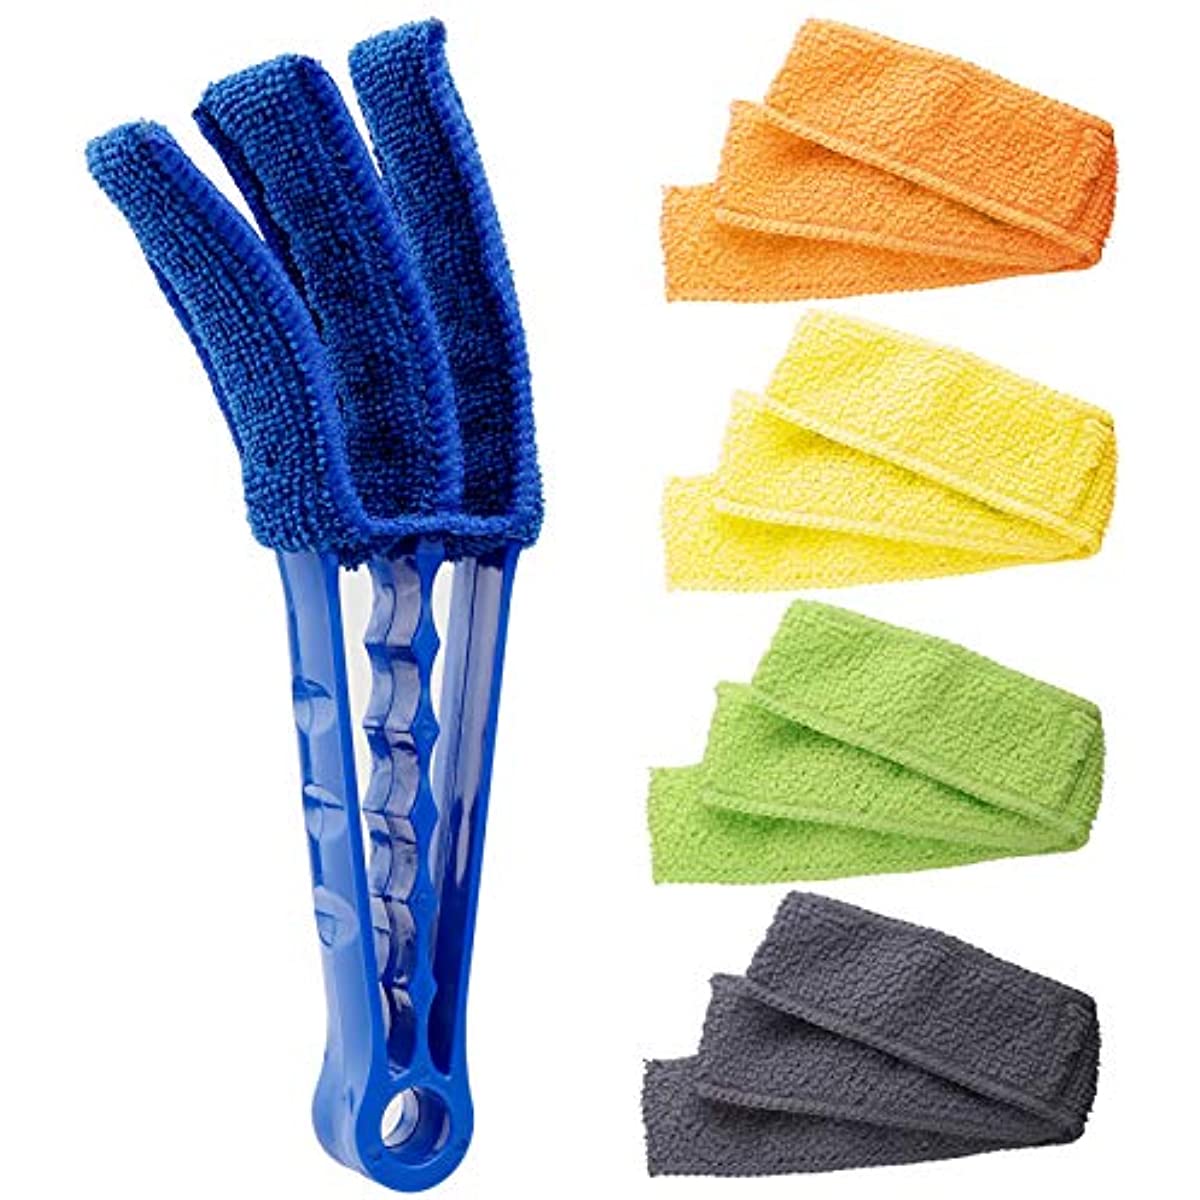 Ms Fix-It Blind Cleaner